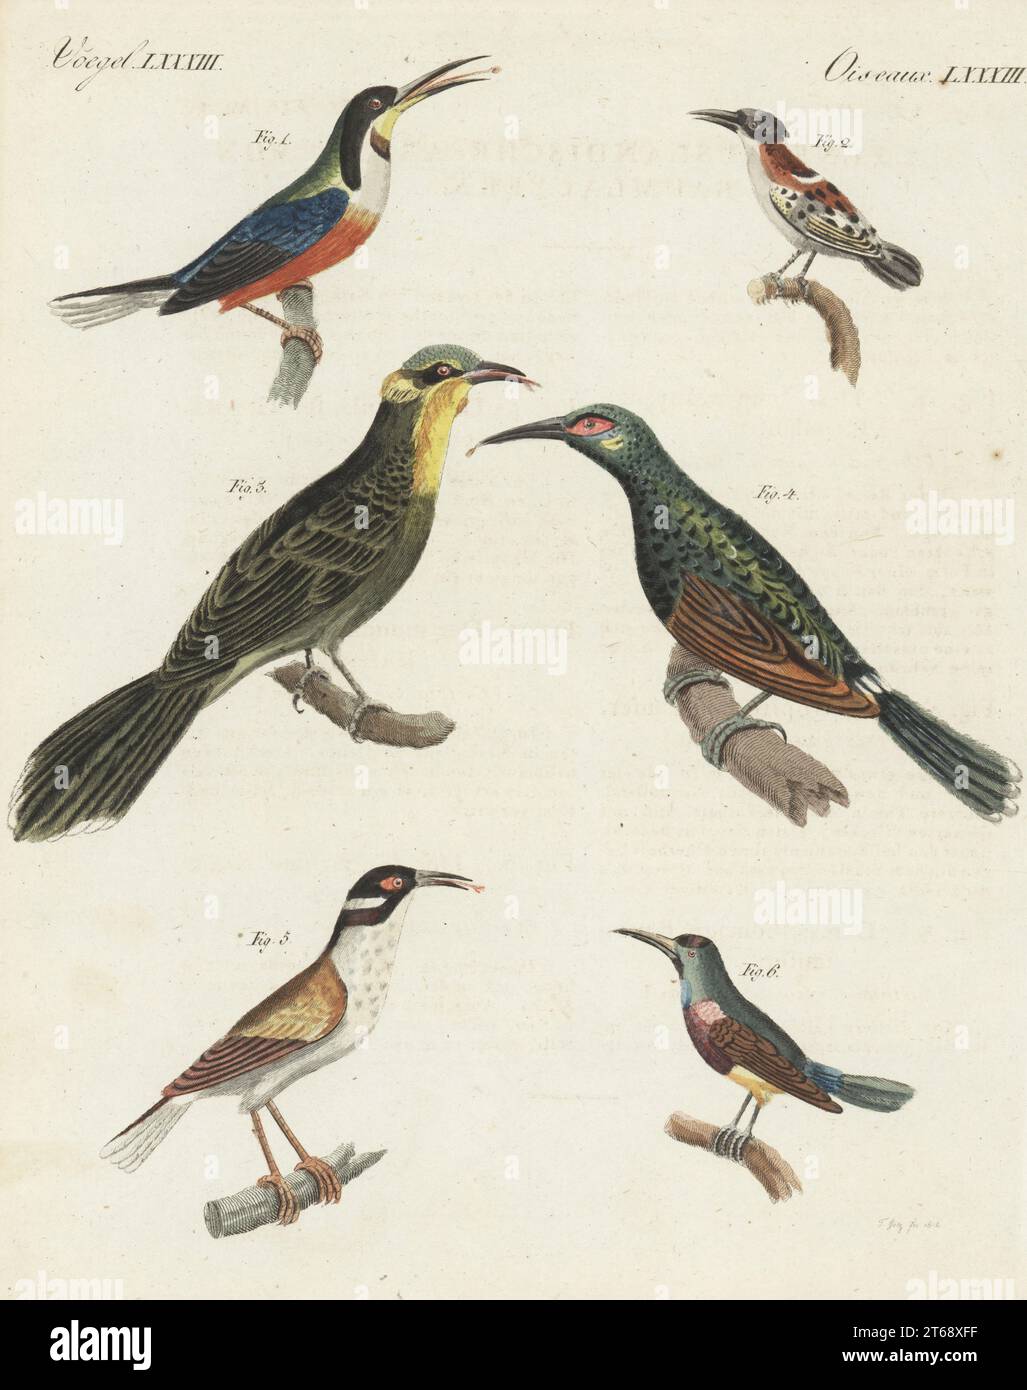 Eastern spinebill, Acanthorhynchus tenuirostris 1, Myzomela species 2, yellow-tufted honeyeater, Lichenostomus melanops 3, brush wattlebird, Anthochaera chrysoptera 4, white-naped honeyeater, Melithreptus lunatus 5, and souimanga sunbird, Cinnyris sovimanga (as quintilor of Sierra Leone) 6. Handcoloured copperplate engraving from Carl Bertuch's Bilderbuch fur Kinder (Picture Book for Children), Weimar, 1812. A 12-volume encyclopedia for children illustrated with almost 1,200 engraved plates on natural history, science, costume, mythology, etc., published from 1790-1830. Stock Photo